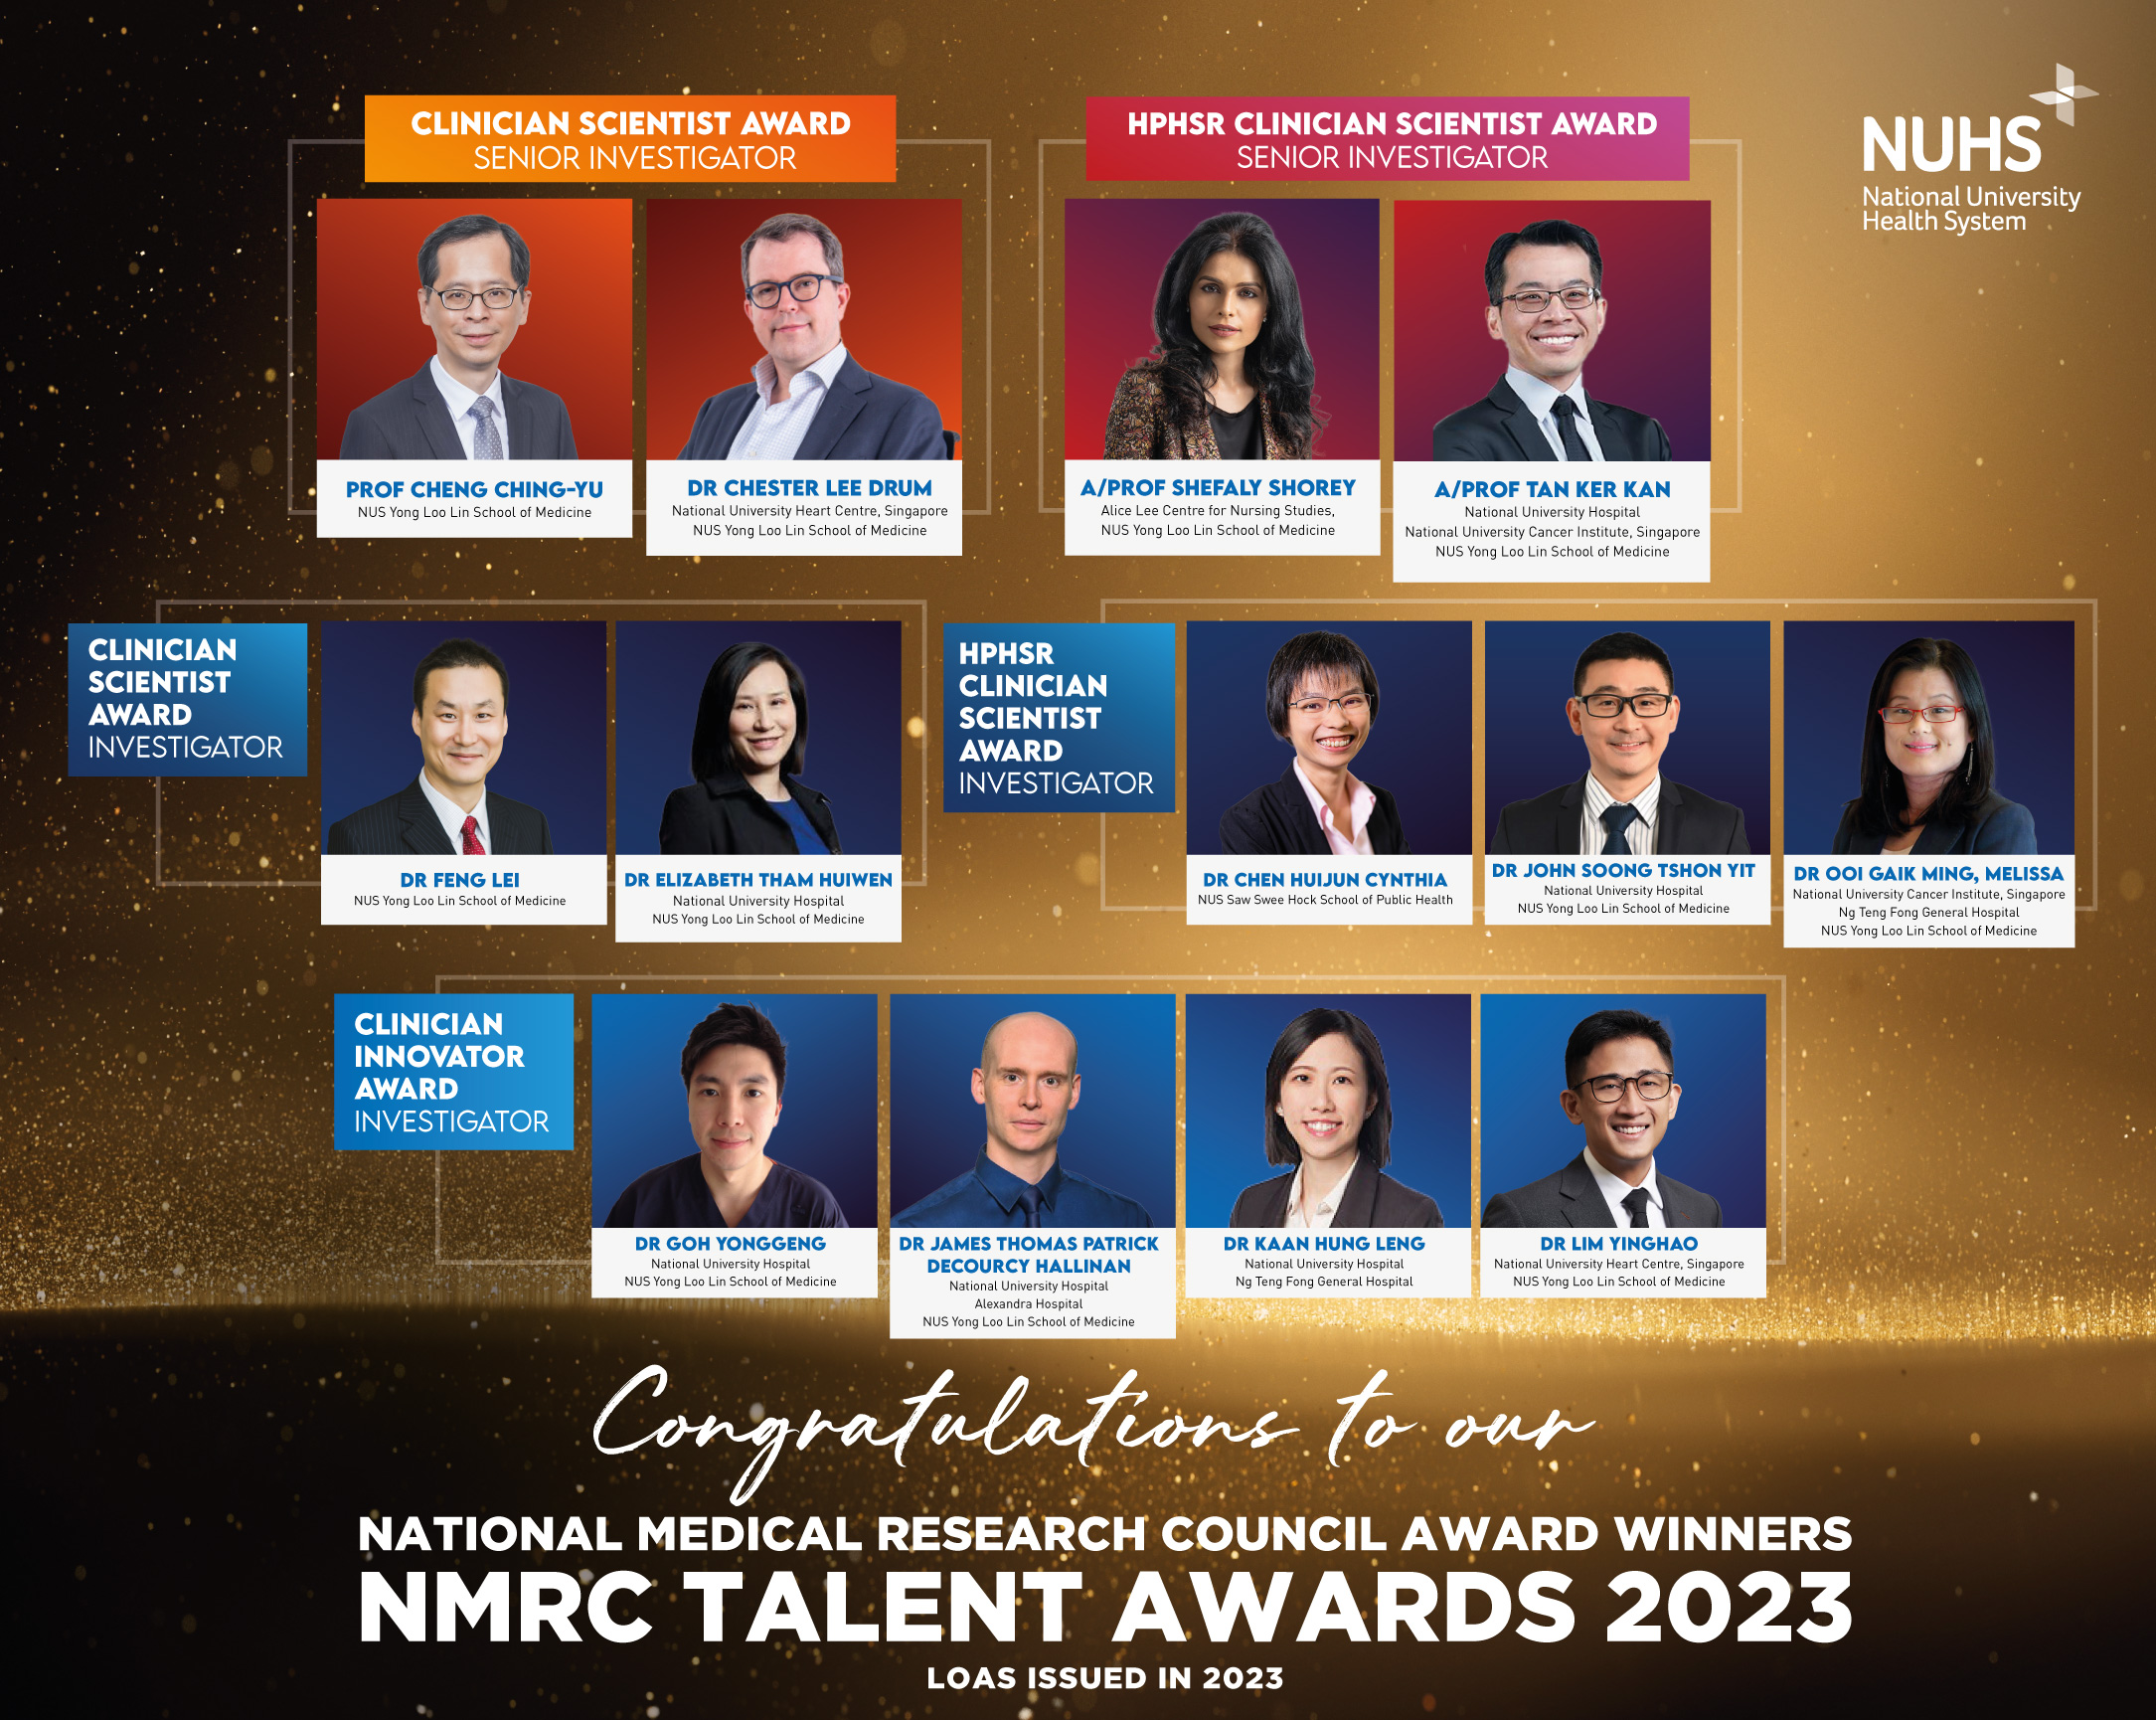 National Medical Research Council Award Winners 2023